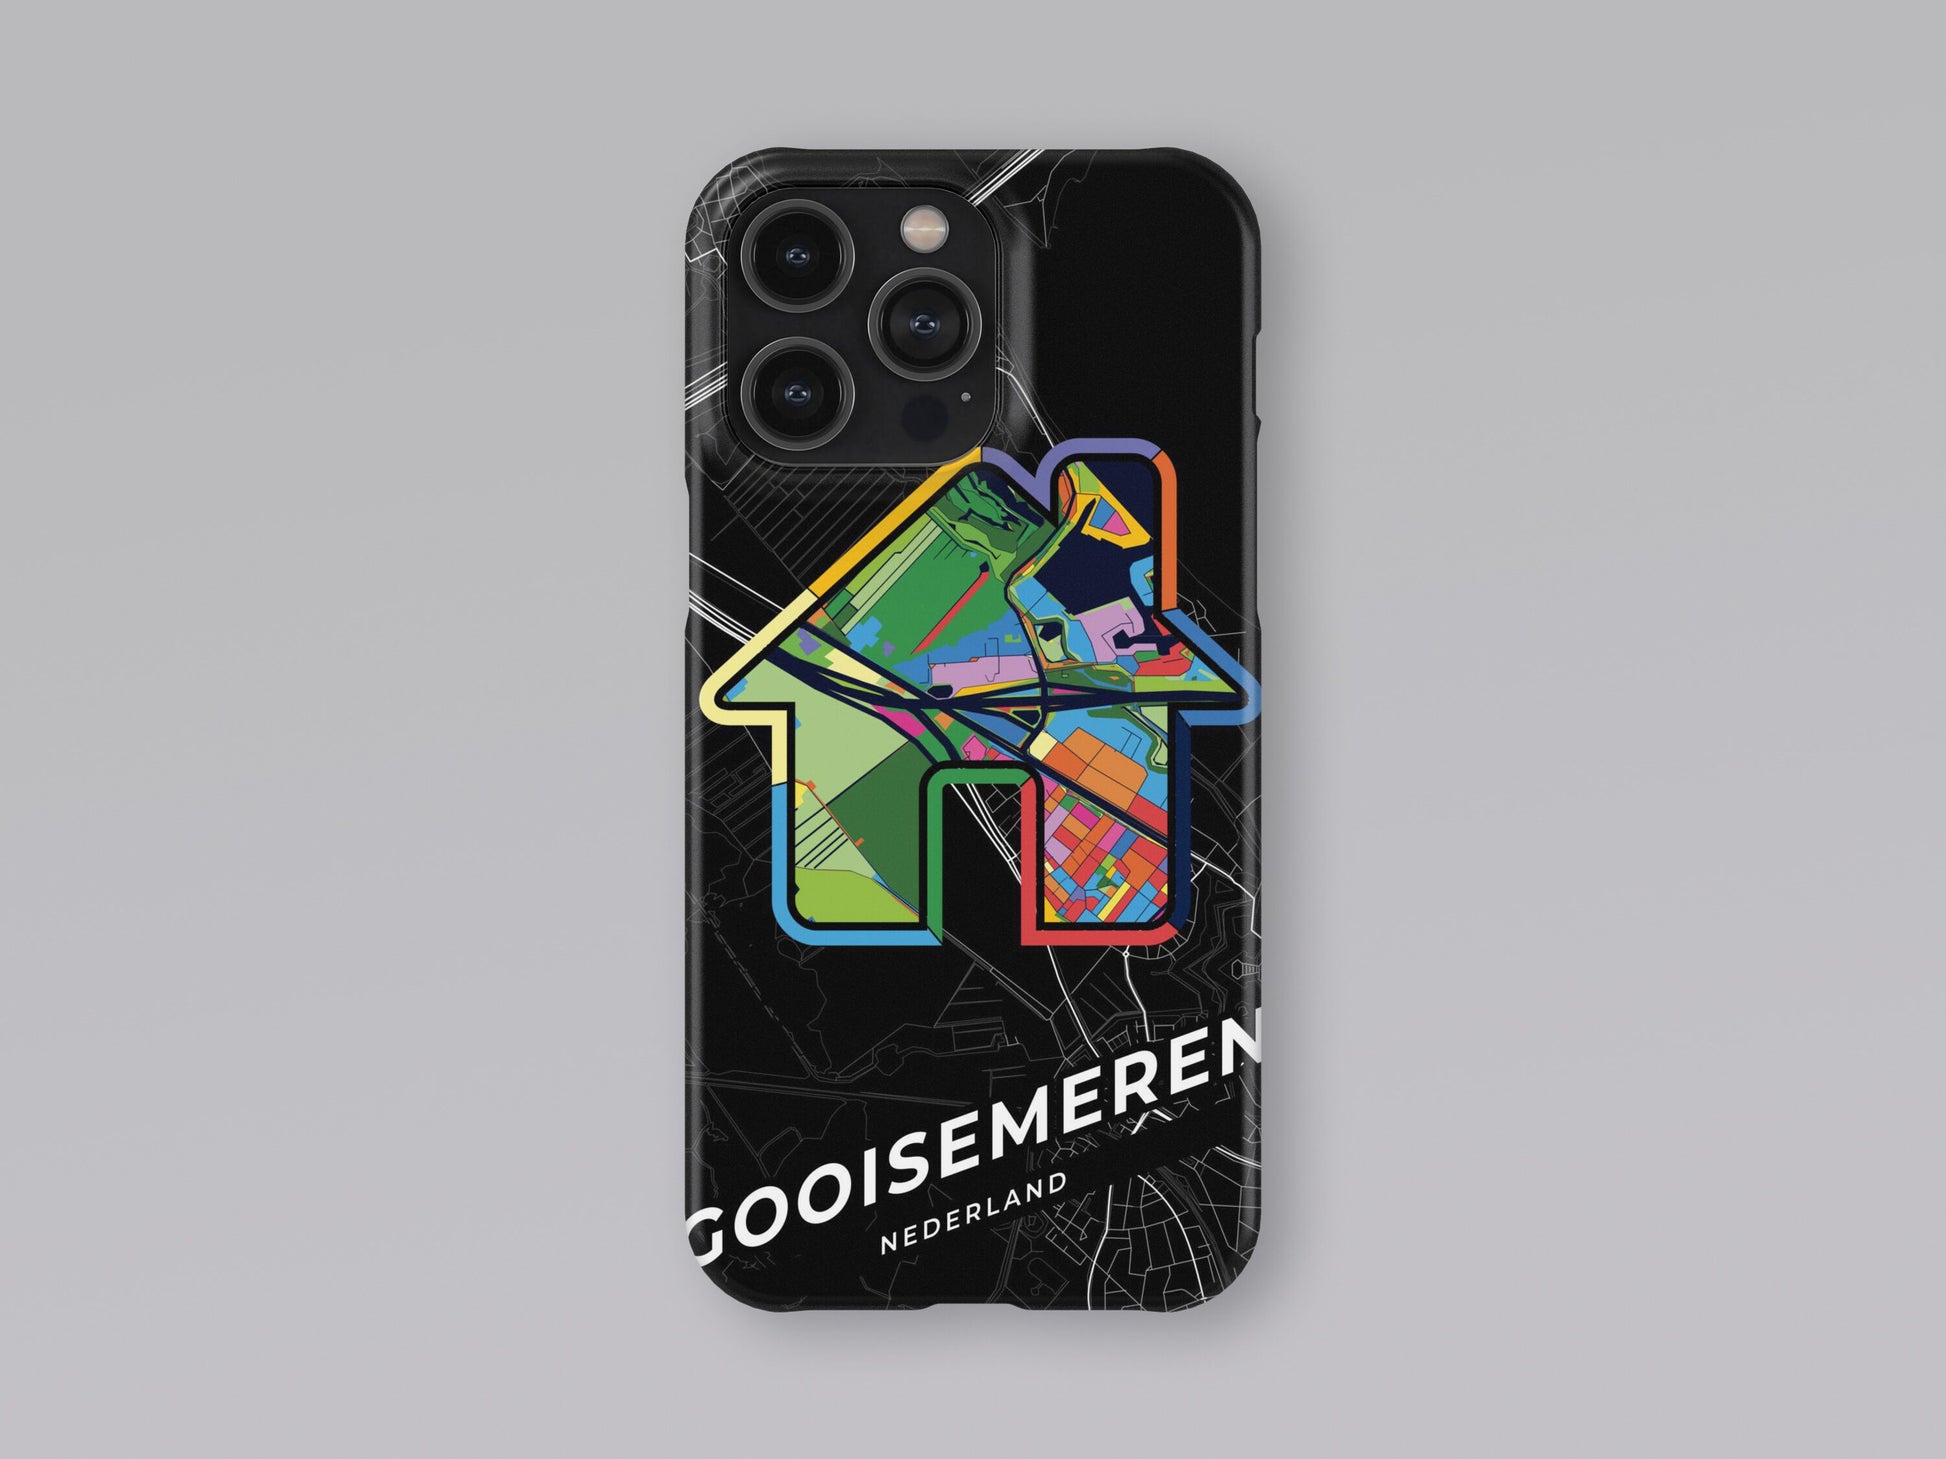 Gooise Meren Netherlands slim phone case with colorful icon. Birthday, wedding or housewarming gift. Couple match cases. 3